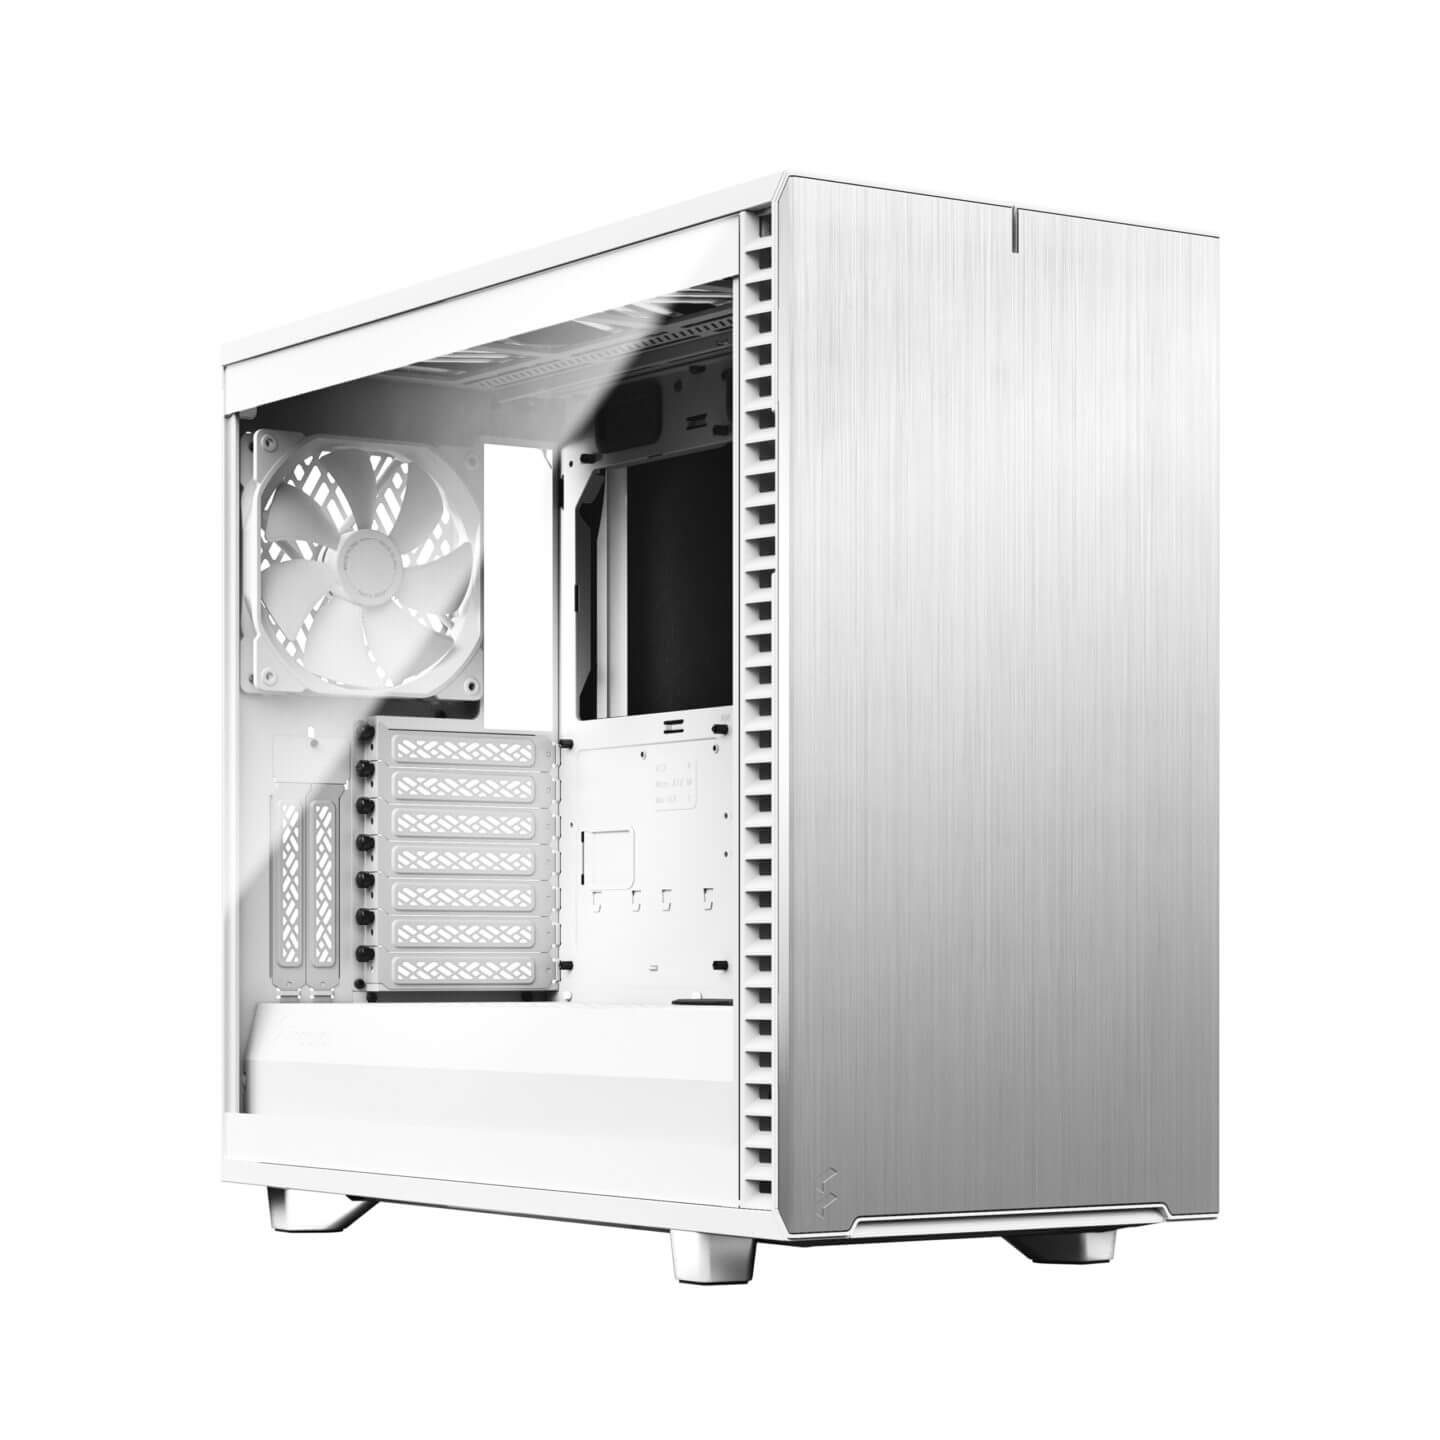 Fractal Design Define 7 Clear Tempered Glass PCケースのイメージ写真